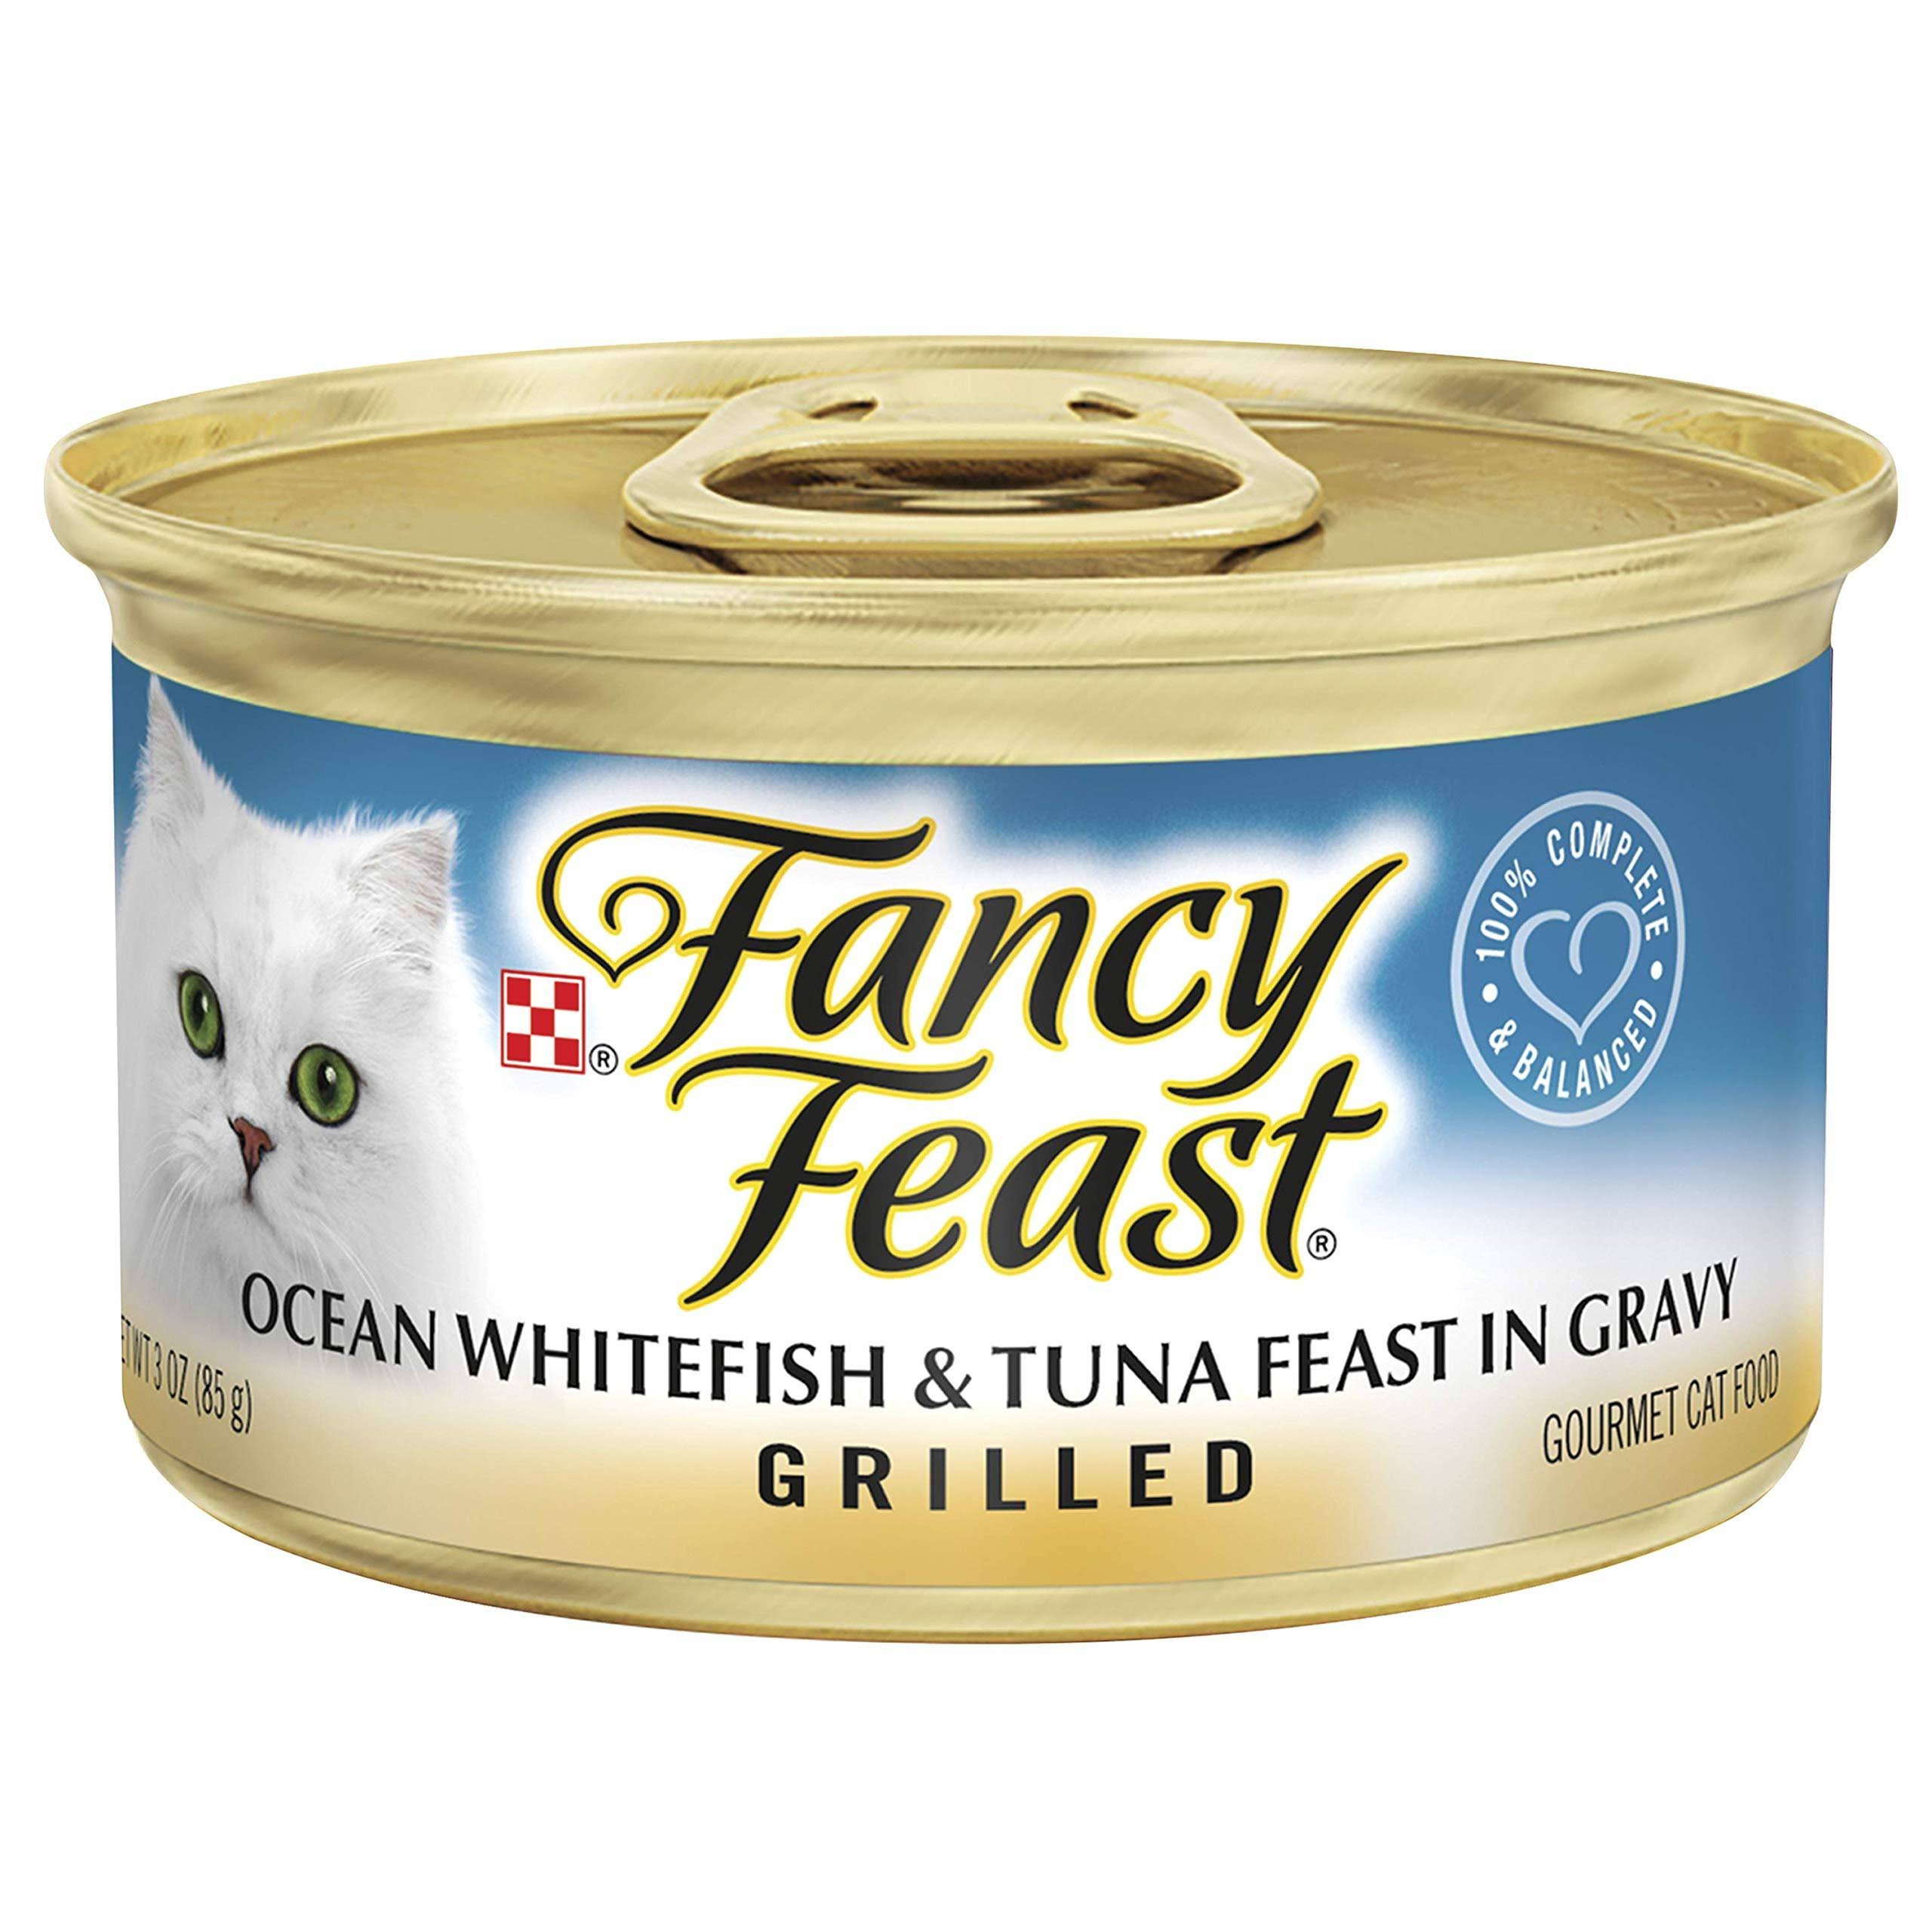 Fancy Feast Grilled Gourmet Cat Food - Ocean Whitefish and Tuna Feast in Gravy, 3oz